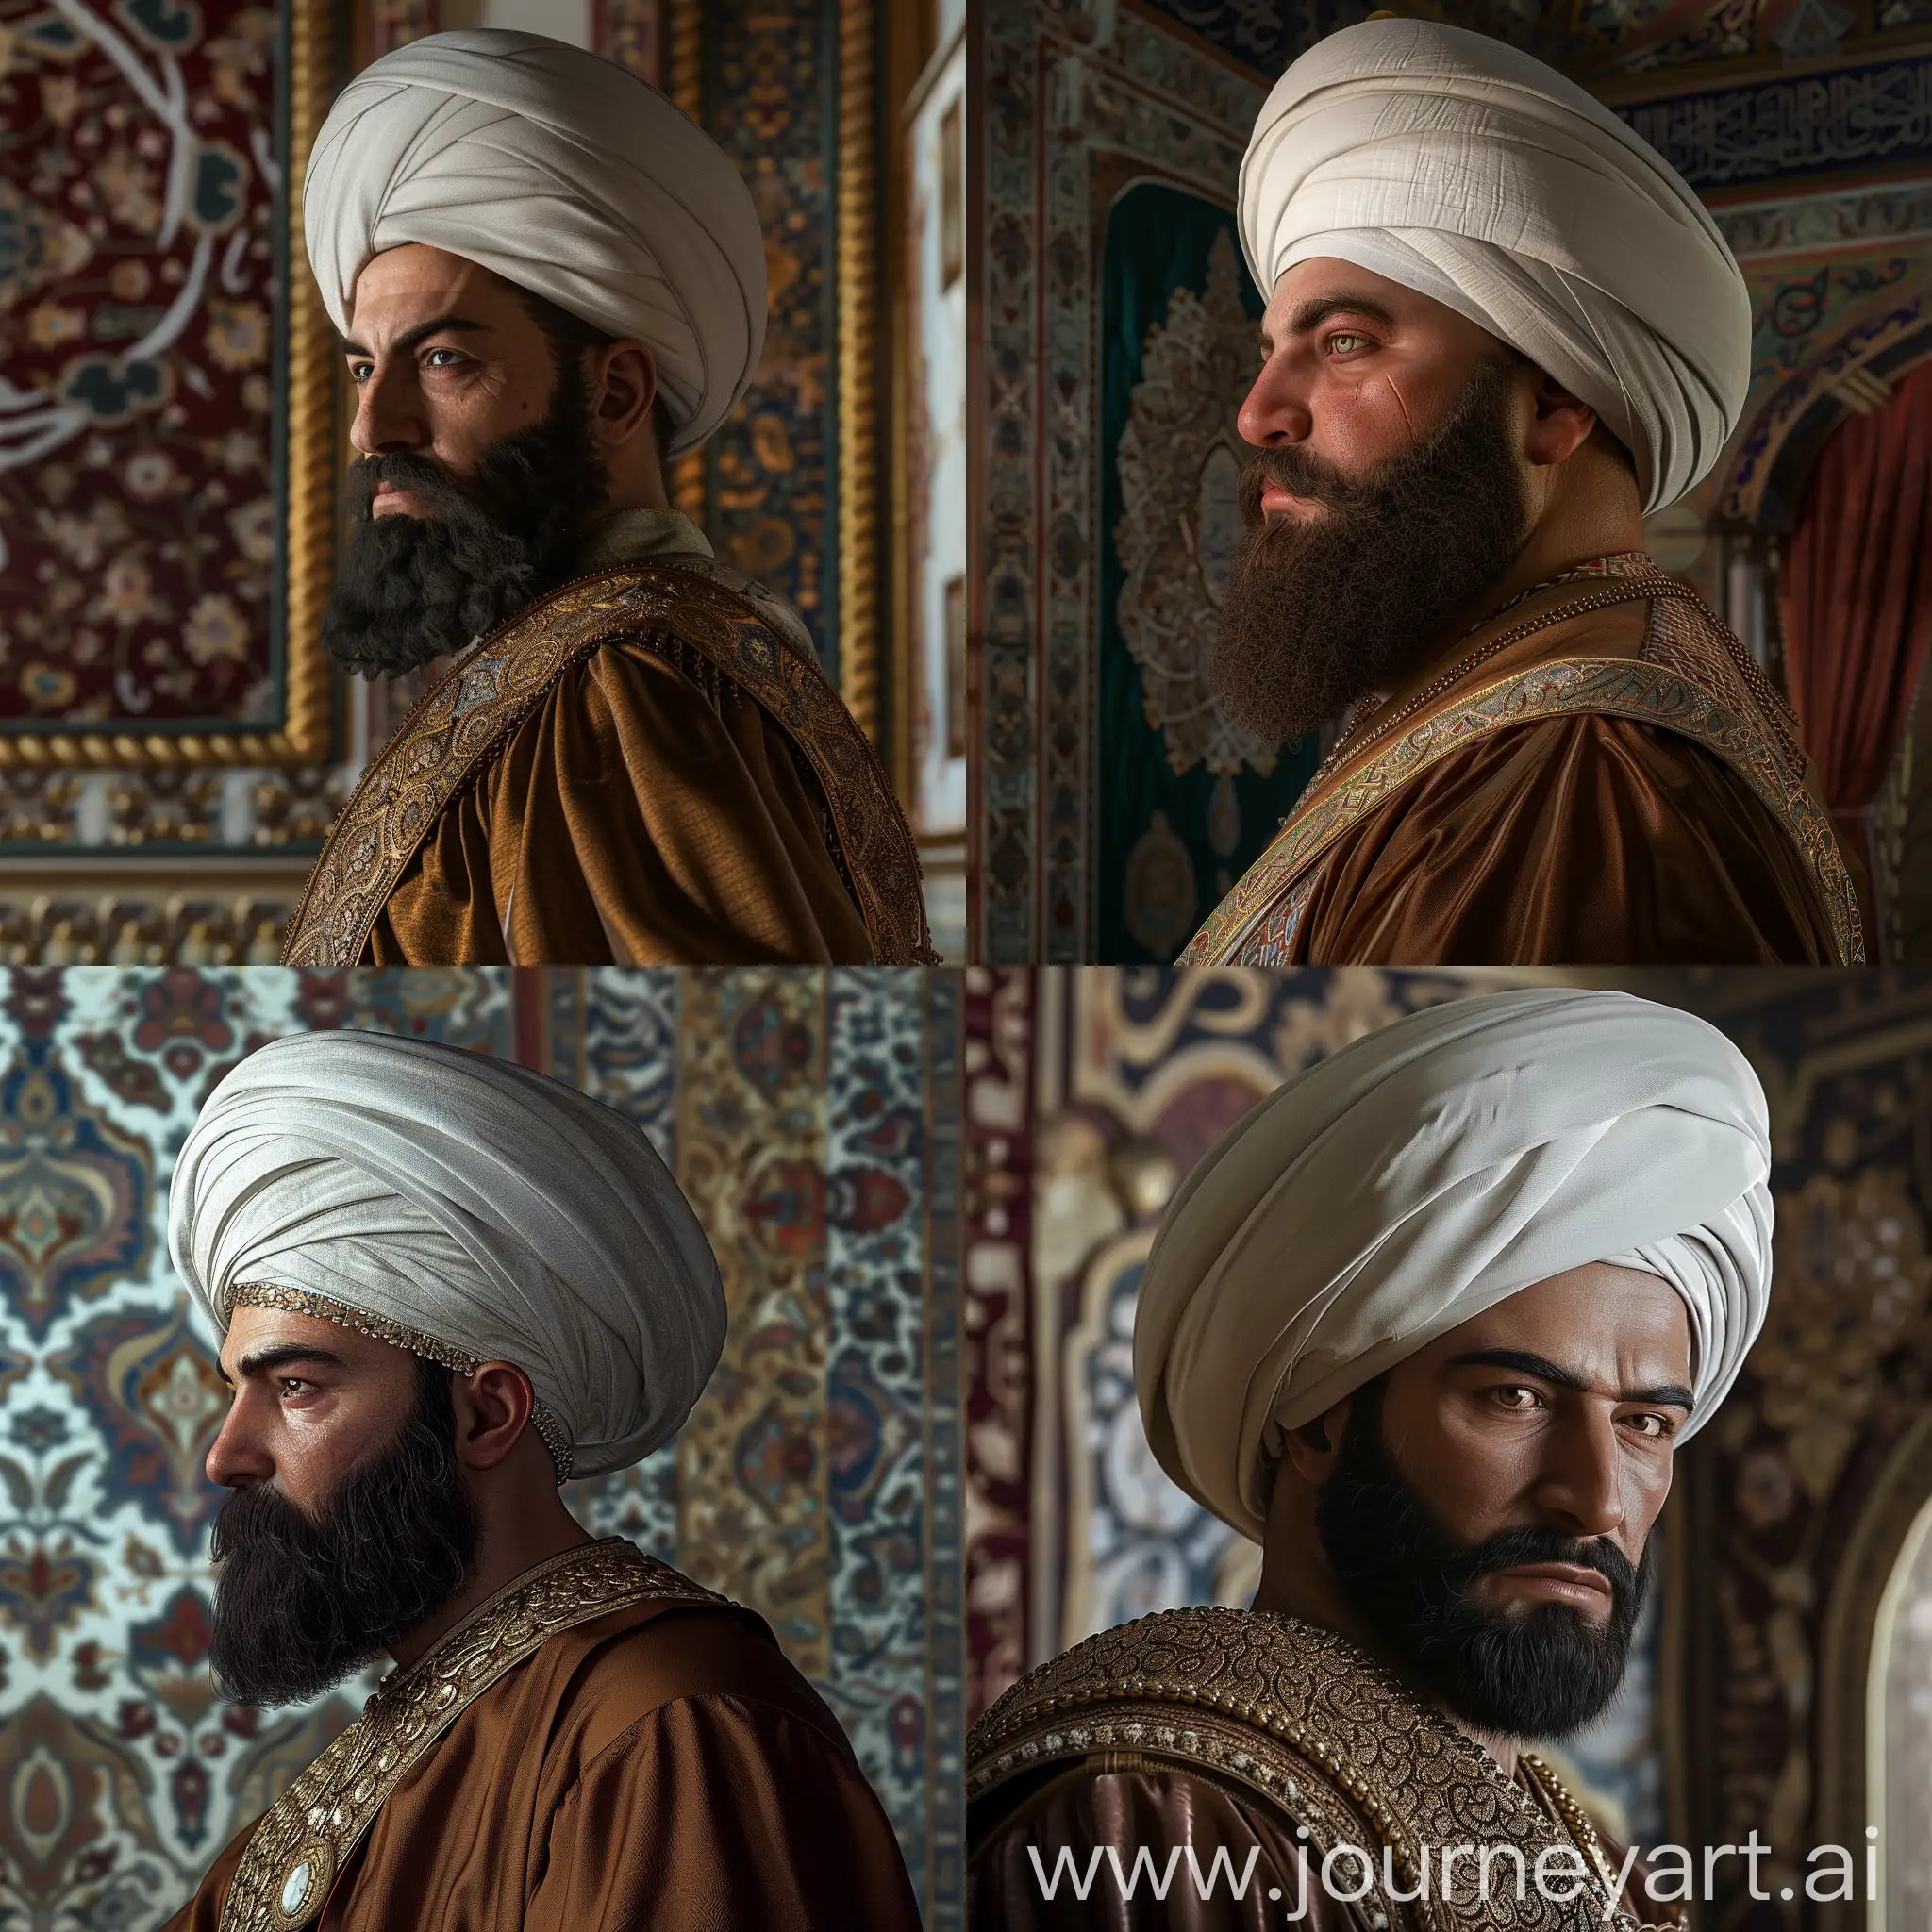 /imagine prompt: 24 years old Ottoman Sultan (Mehmed II) side posing, ottoman genetics, ottoman nose, full average beard, big white ottoman turban and brown silk caftan, in ottoman palace, islamic motifs, high quality, realistic, bold, Unreal Engine, by Danny Clinch